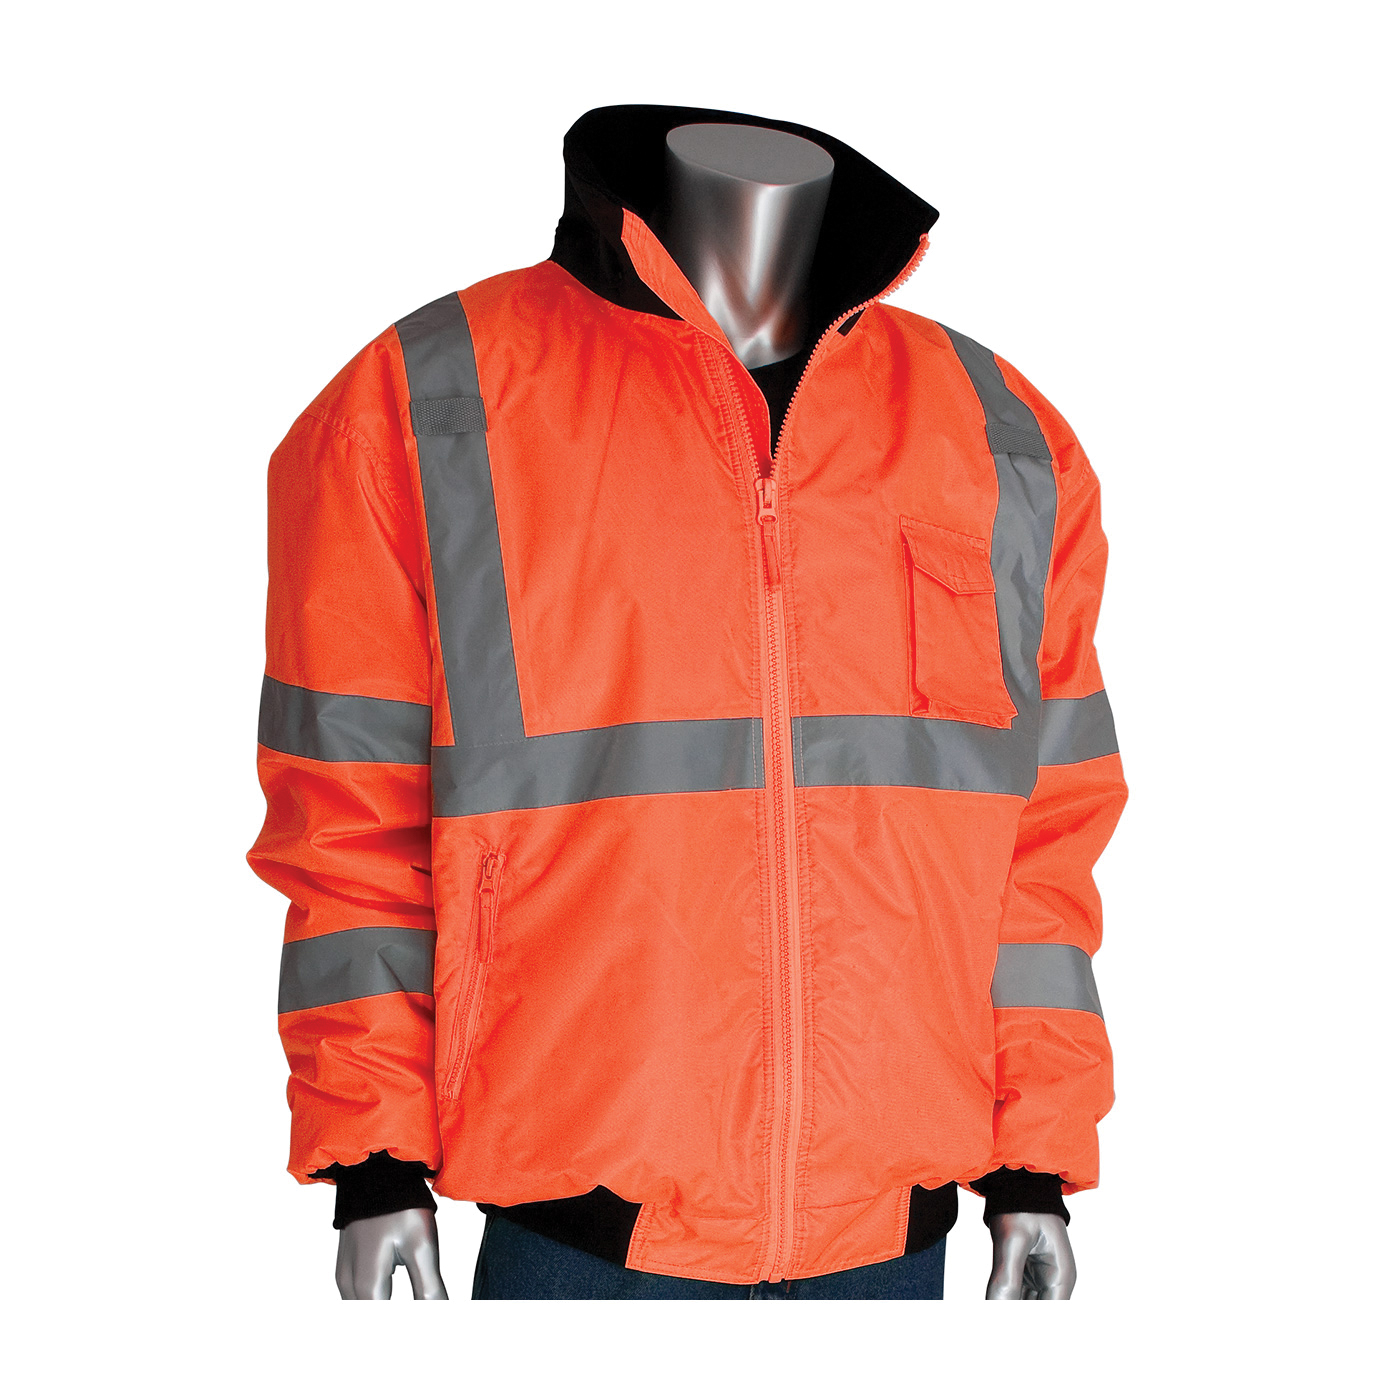 PIP® 333-1762-OR/XL Bomber Jacket With Zip-Out Fleece Liner, Hi-Viz Lime Orange, Polyester, 59 in Chest, Resists: Water, Specifications Met: ANSI 107 Class 3 Type R